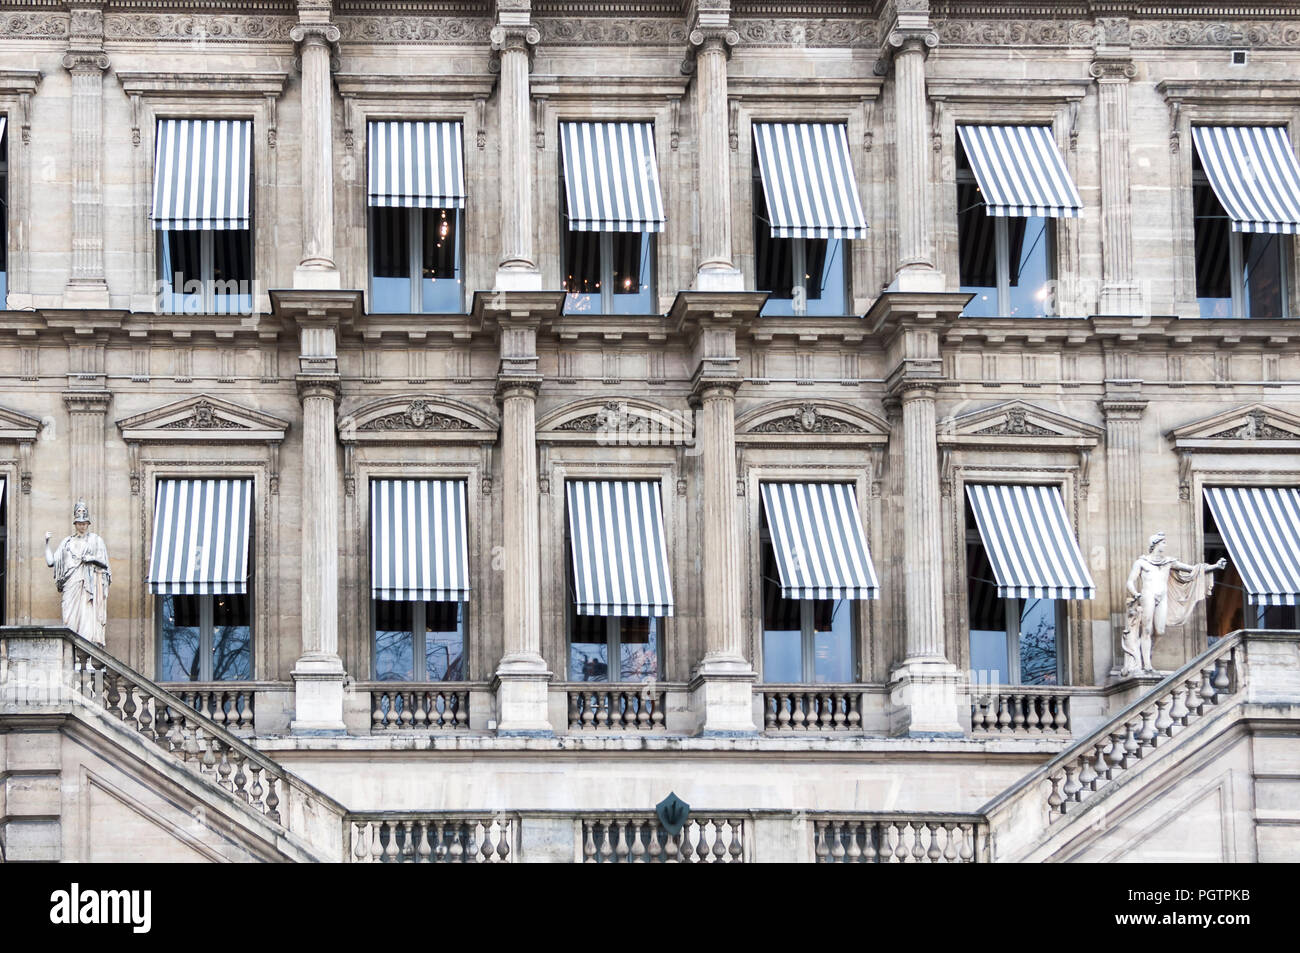 Striped awnings cover windows on an old building with ornate details in Paris France. Stock Photo